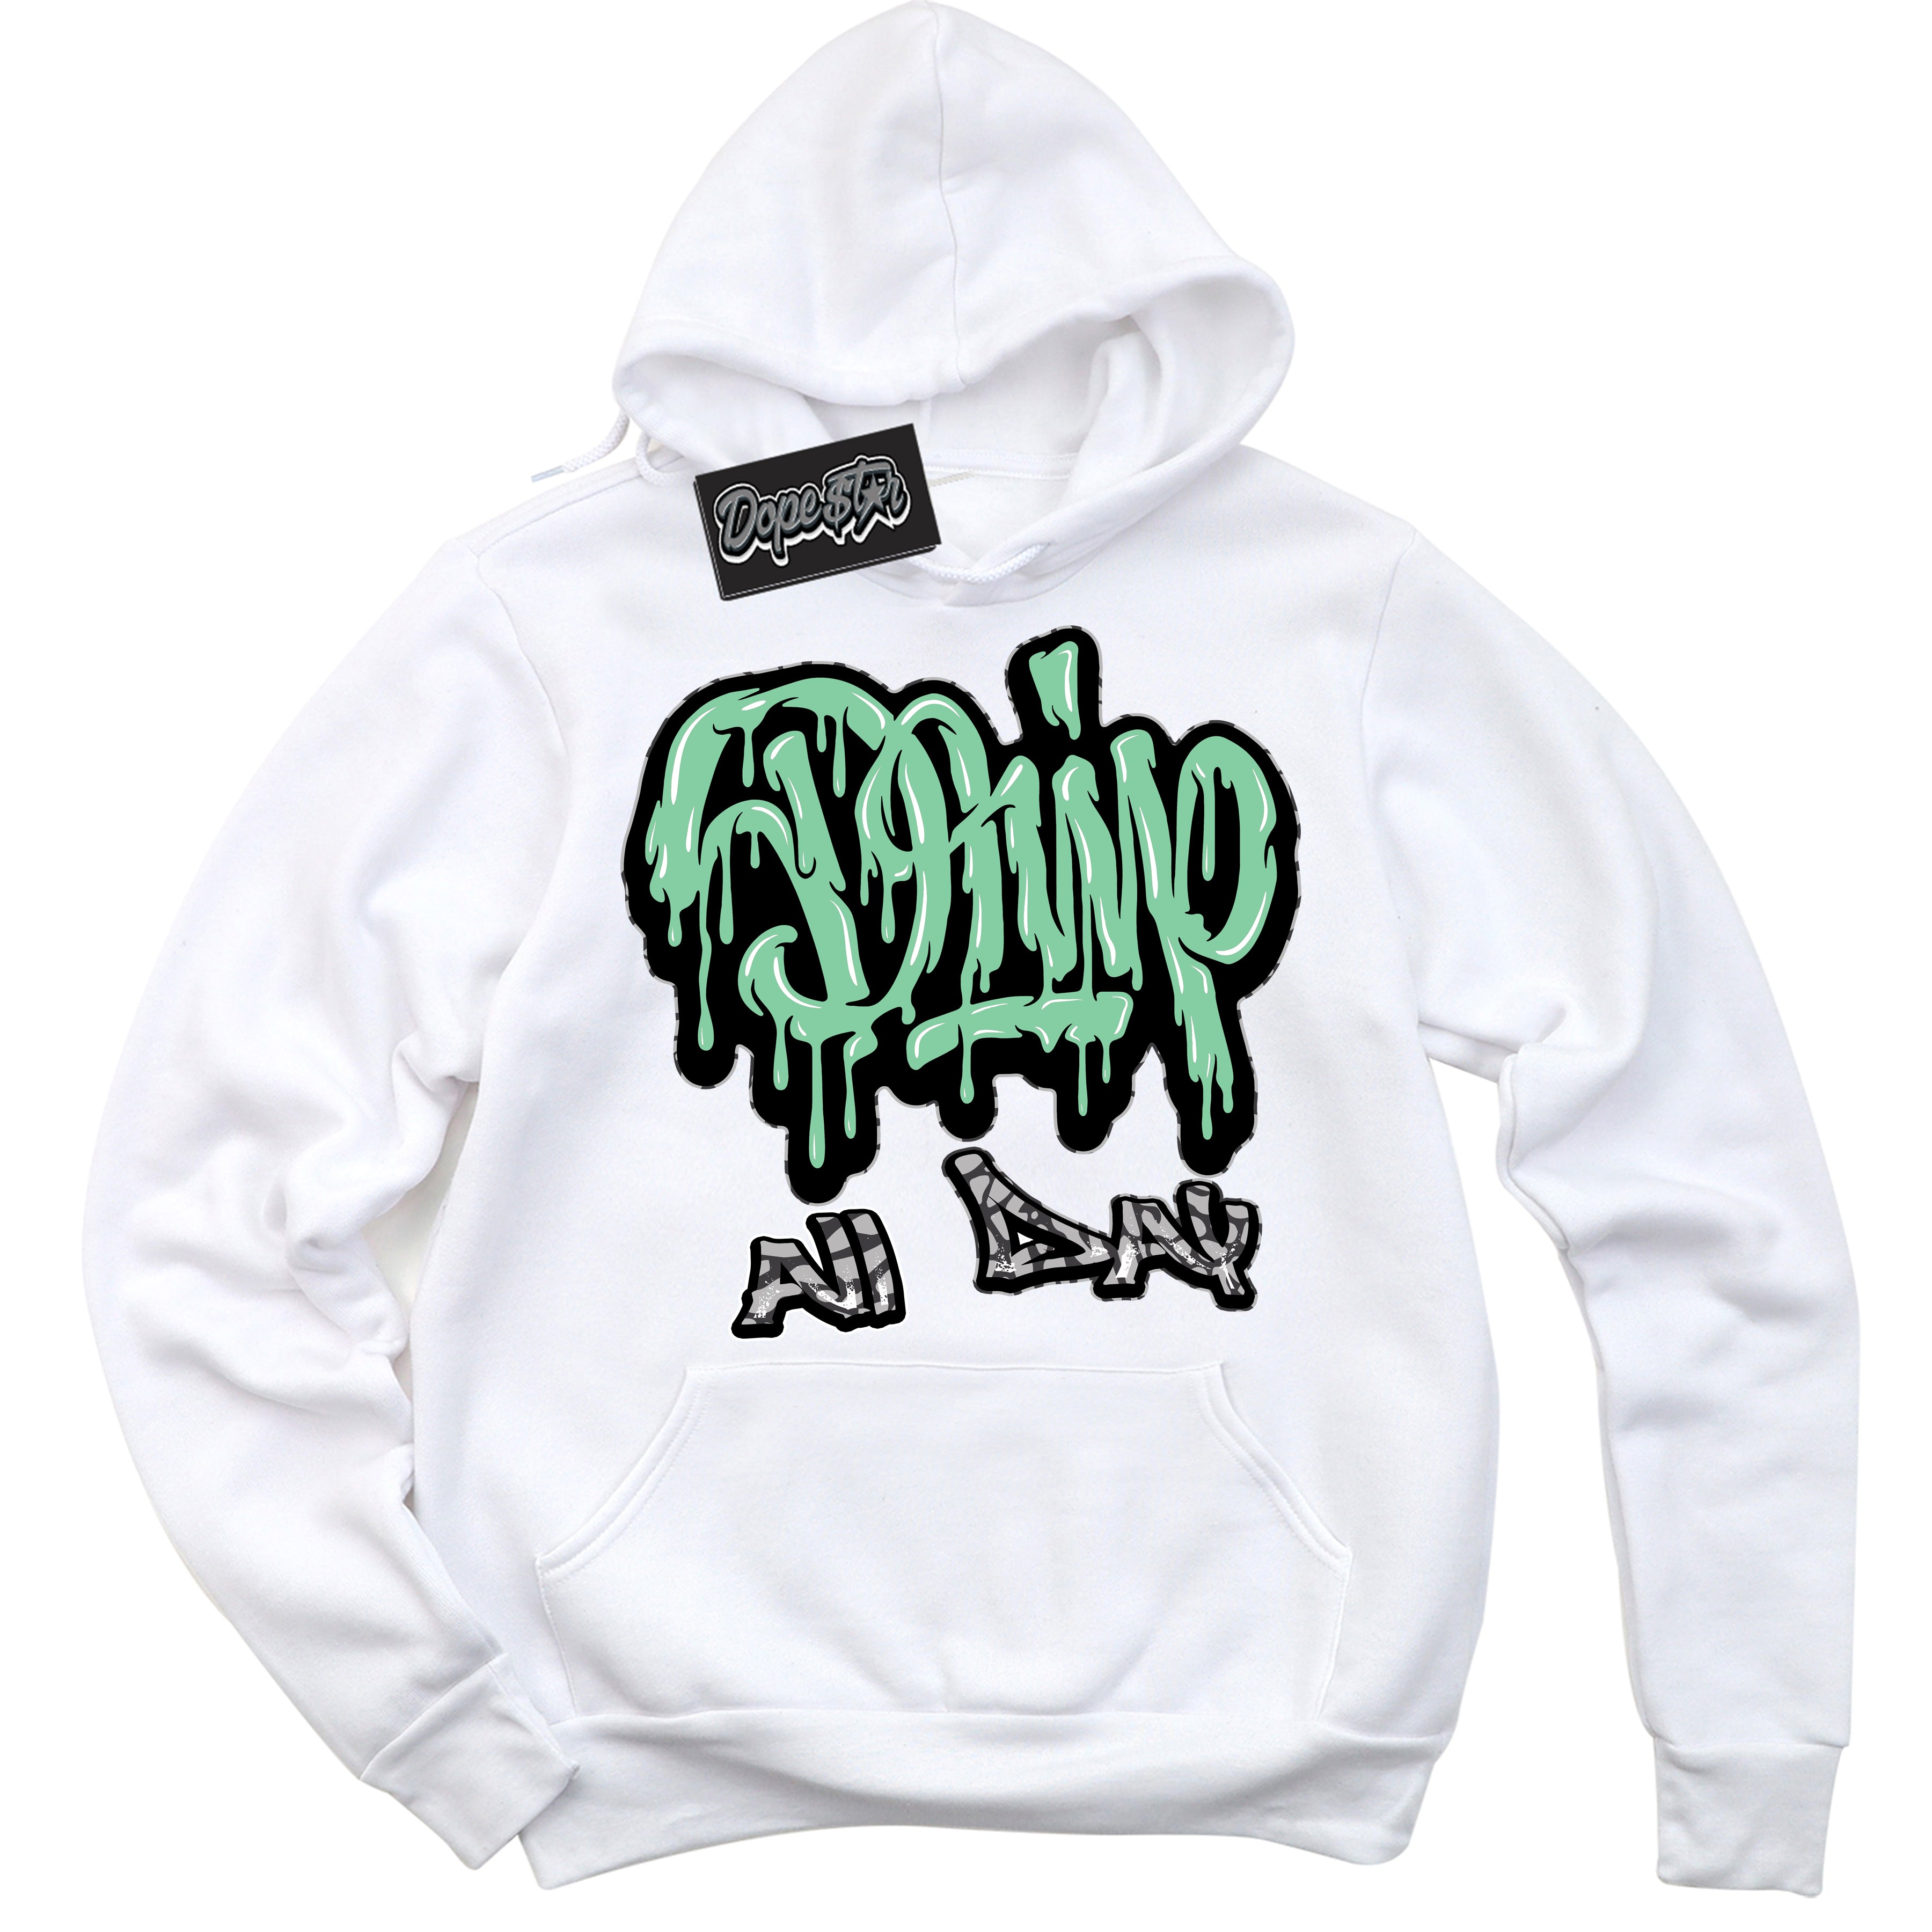 Cool White Graphic DopeStar Hoodie with “ Drip All Day “ print, that perfectly matches Green Glow 3s sneakers